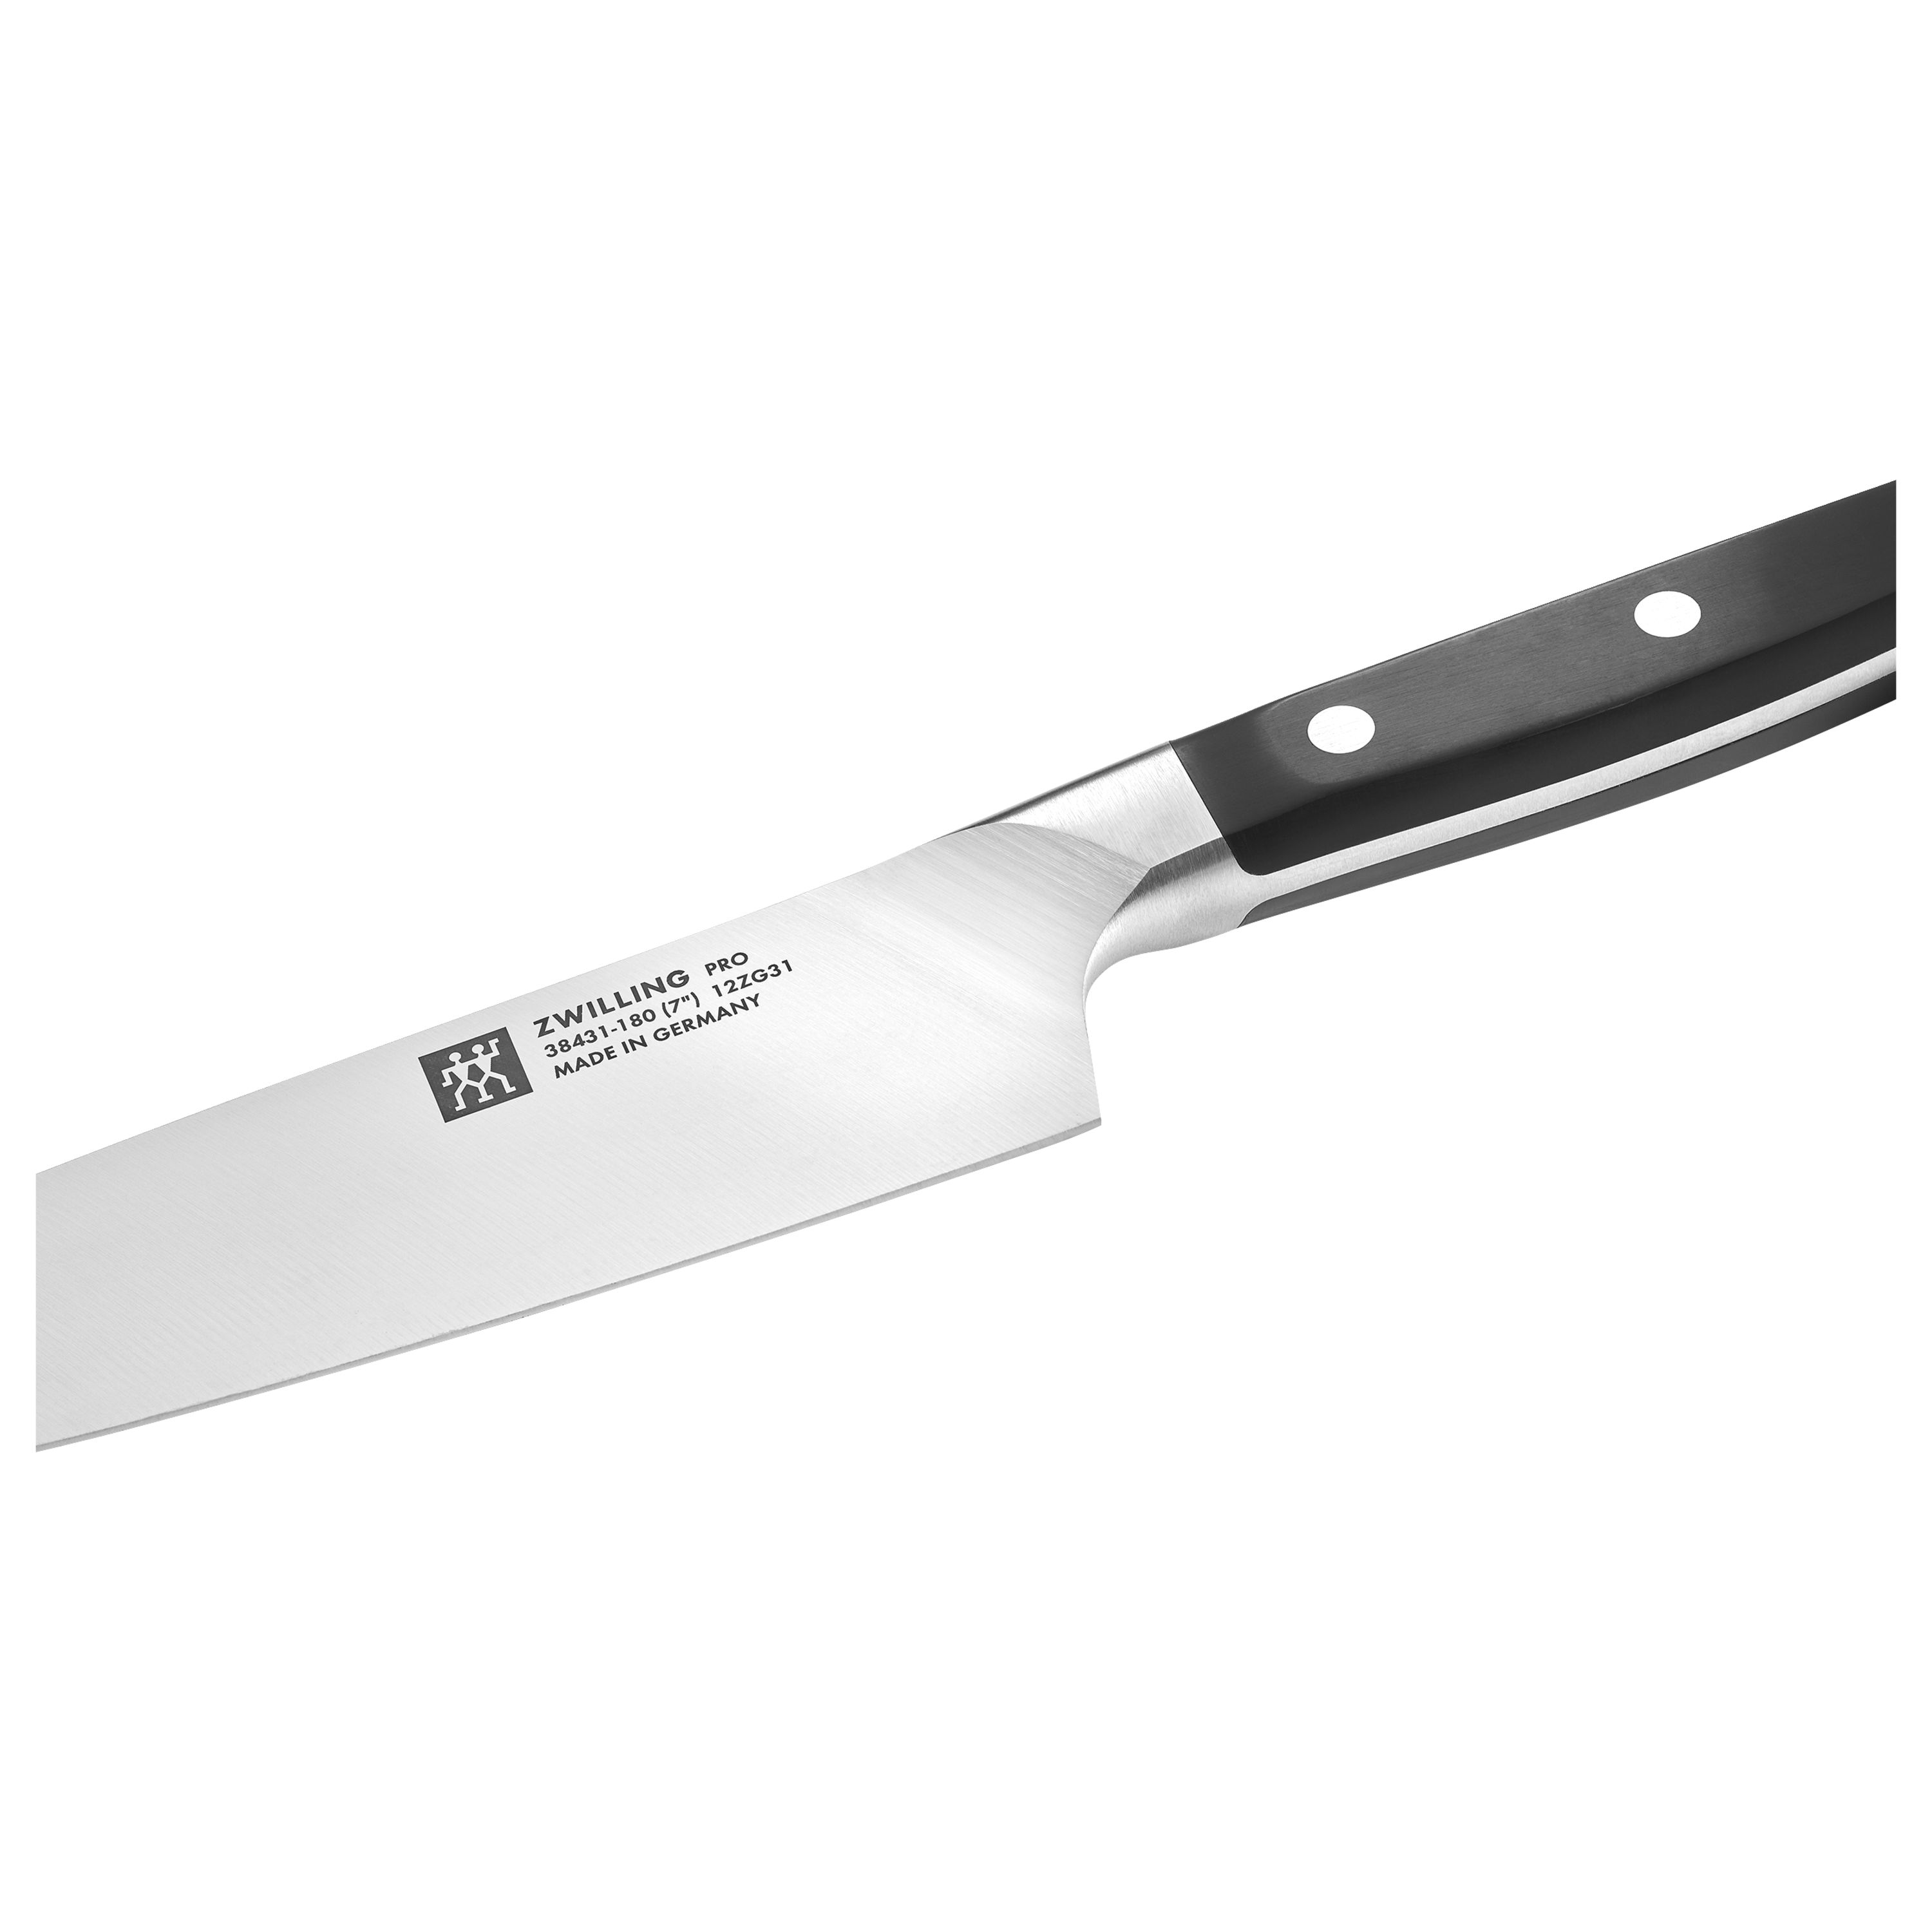 This Henckels Chef Knife Is Over 60% Off Right Now – SheKnows